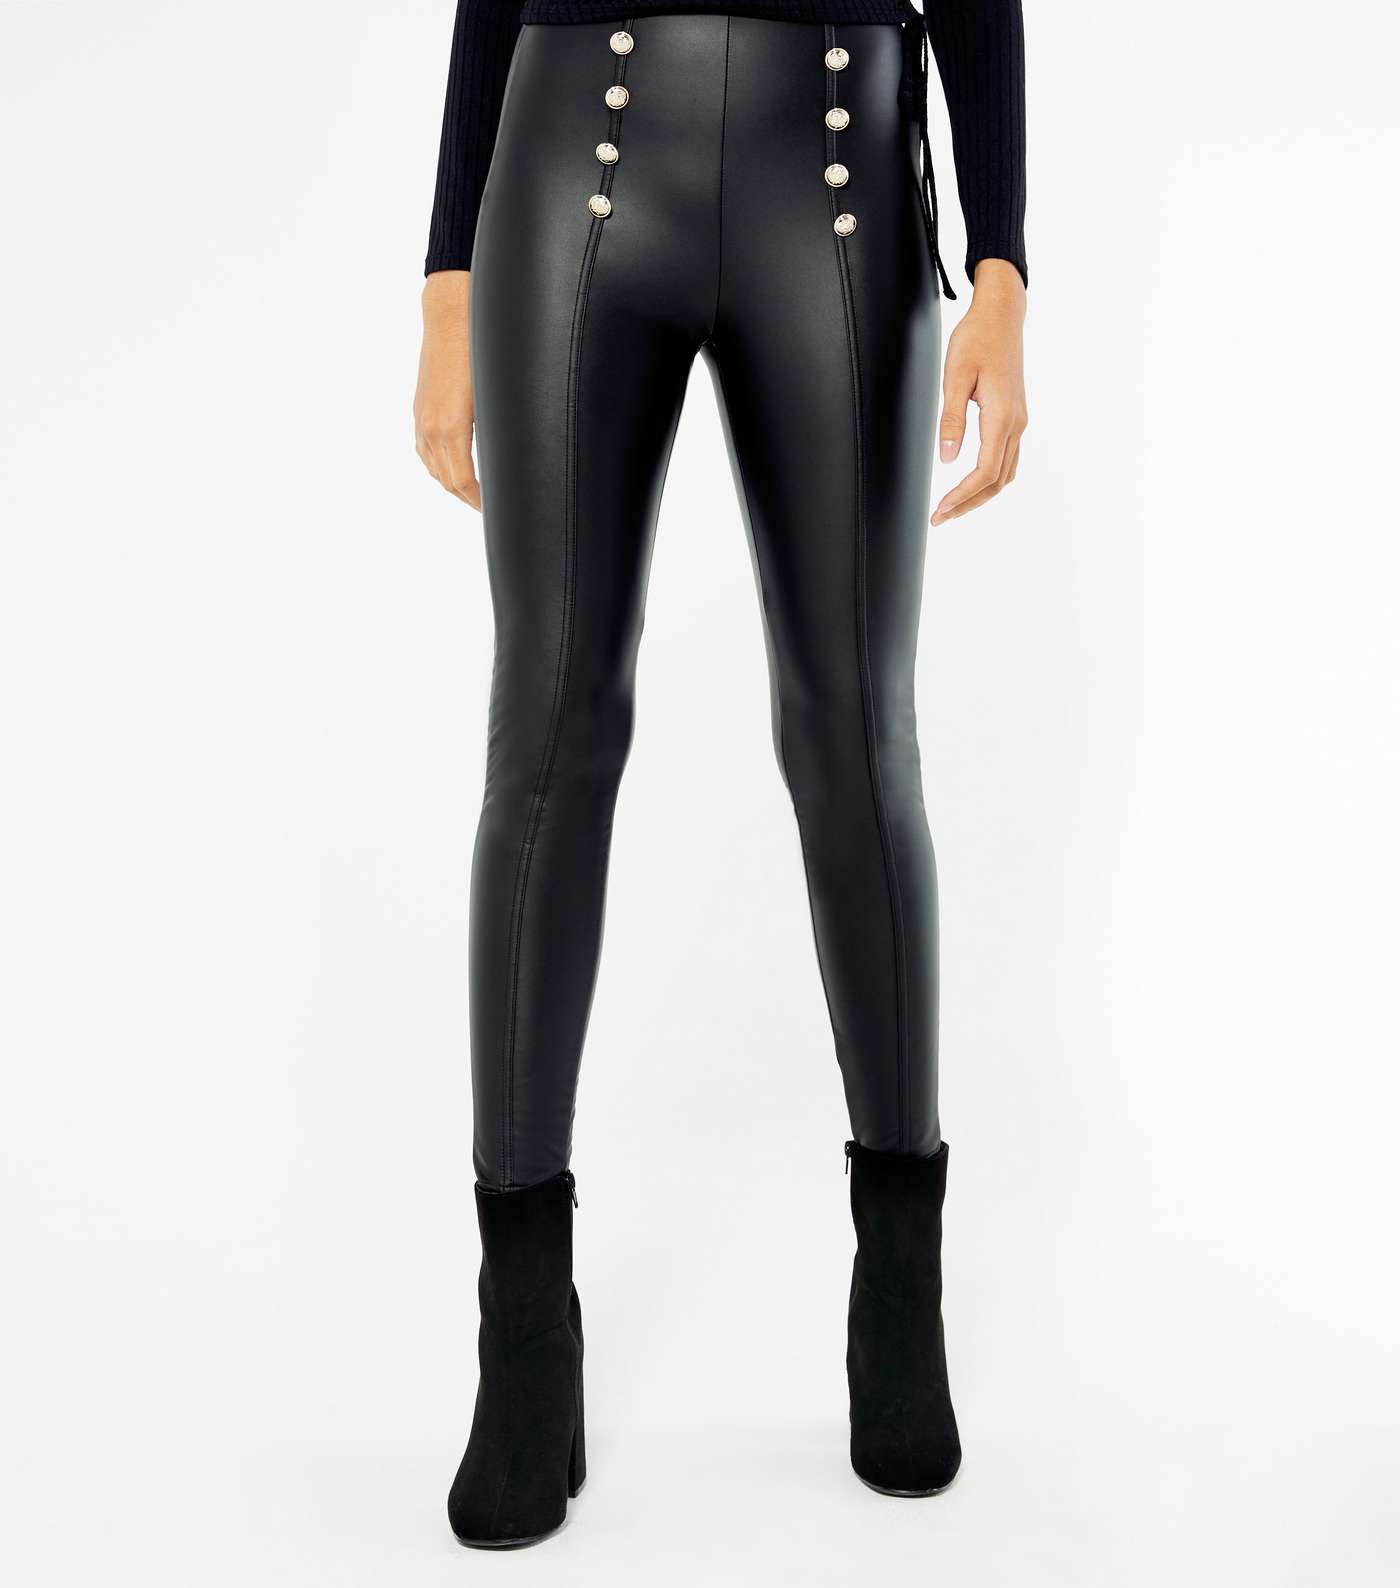 Black Leather-Look Military Button Leggings Image 2